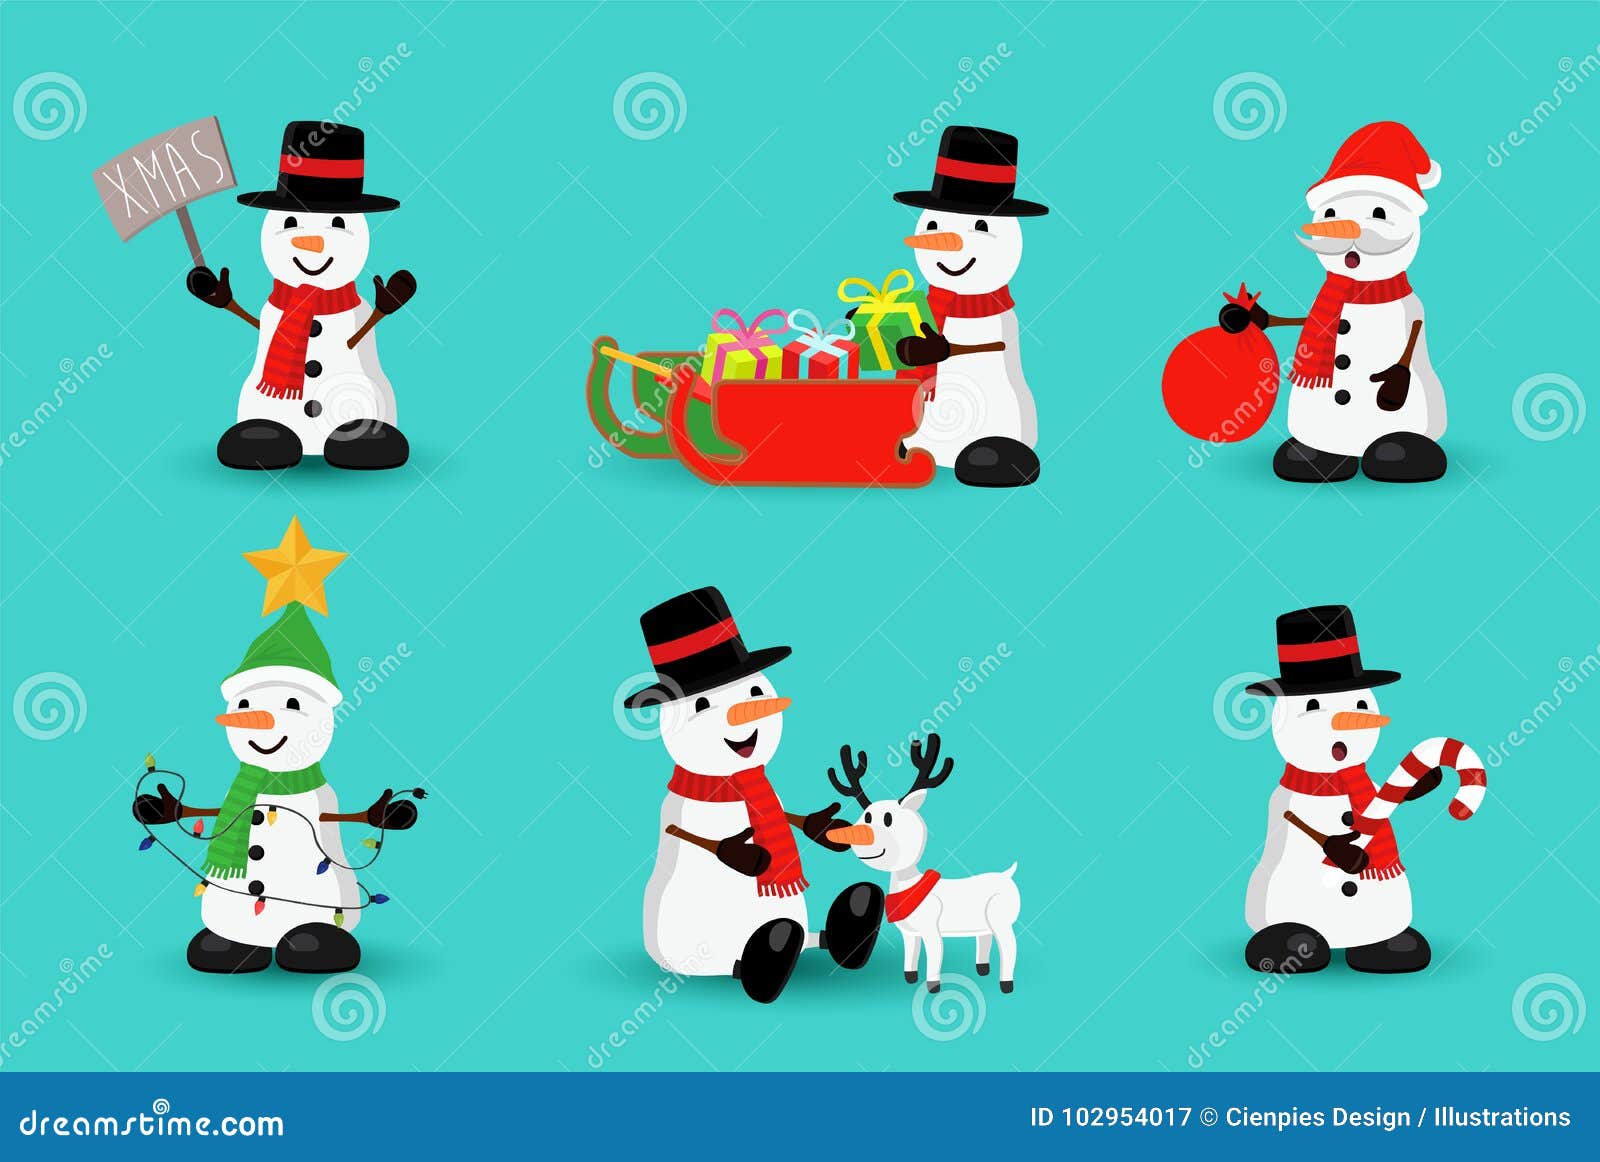 Christmas Snowman Funny Holiday Cartoon Set Stock Vector - Illustration of  celebration, collection: 102954017